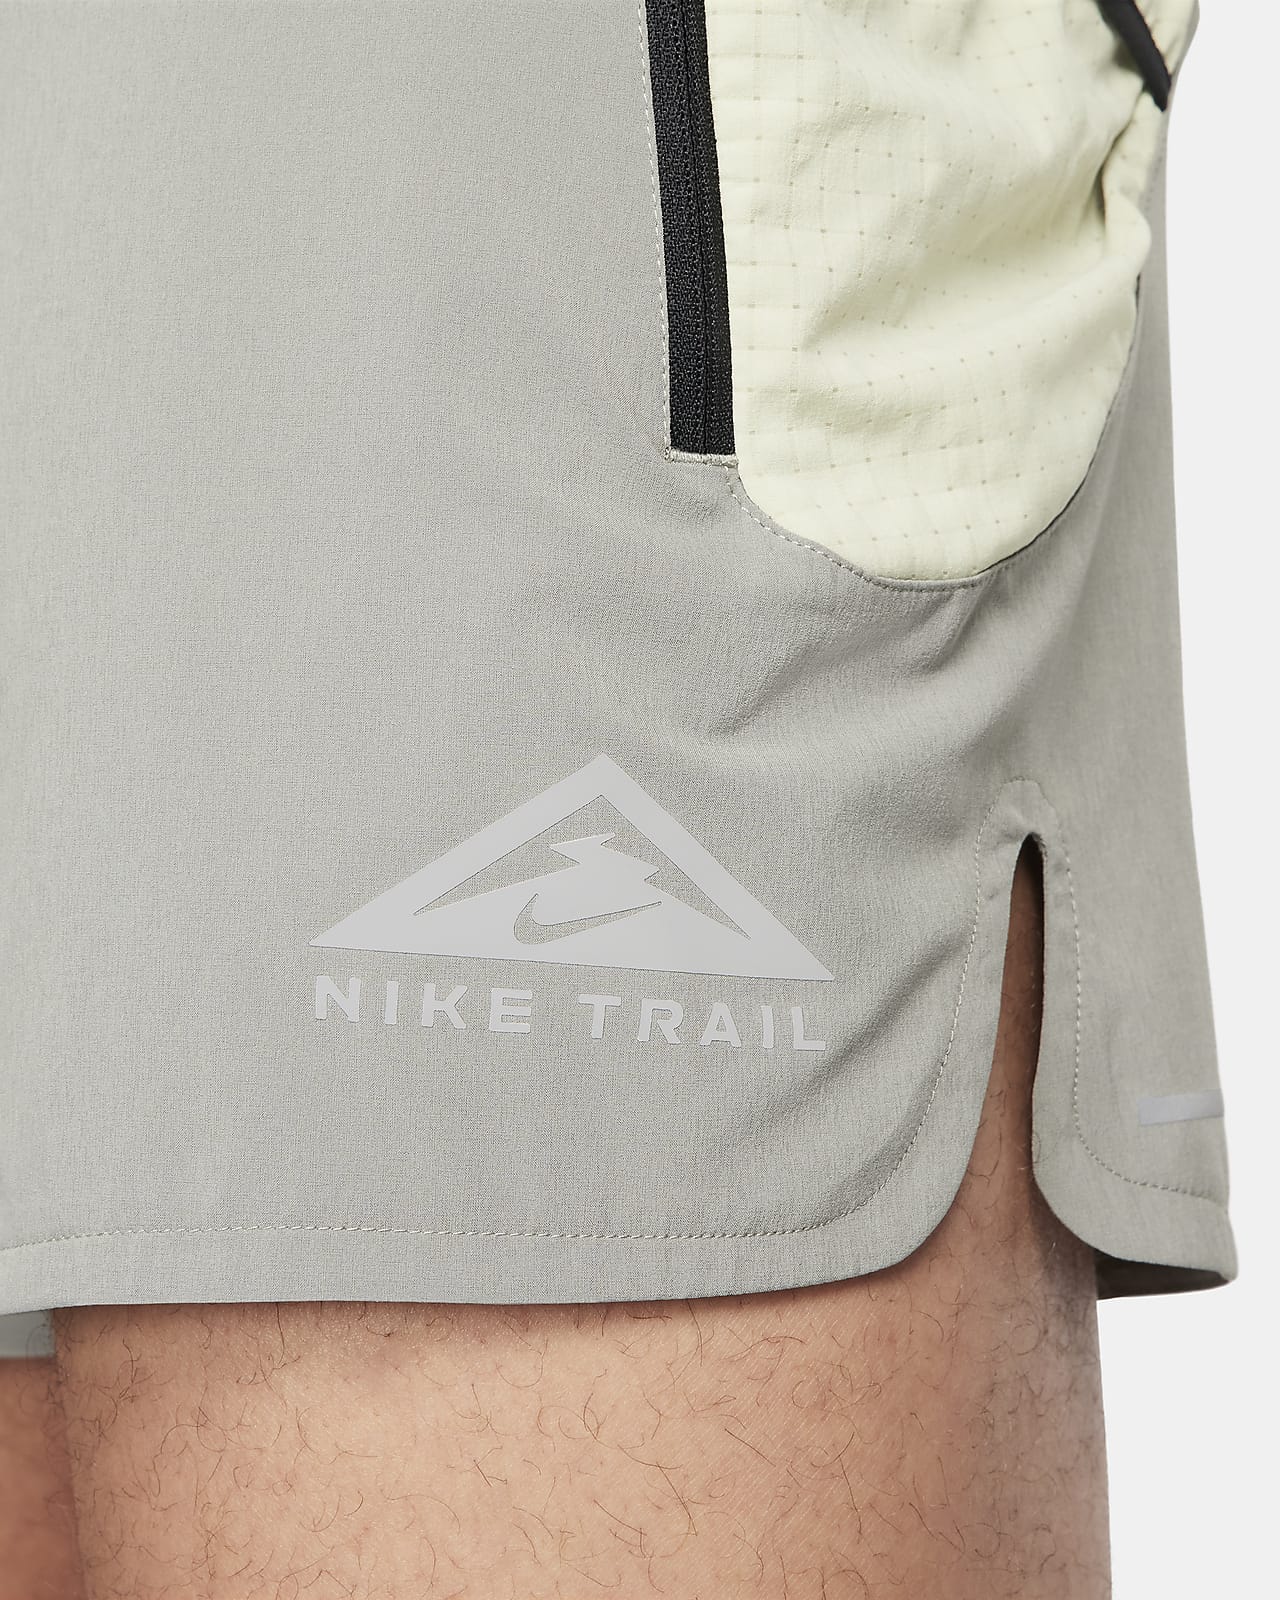 Nike Trail Second Sunrise Men's Dri-FIT 5 Brief-Lined Running Shorts